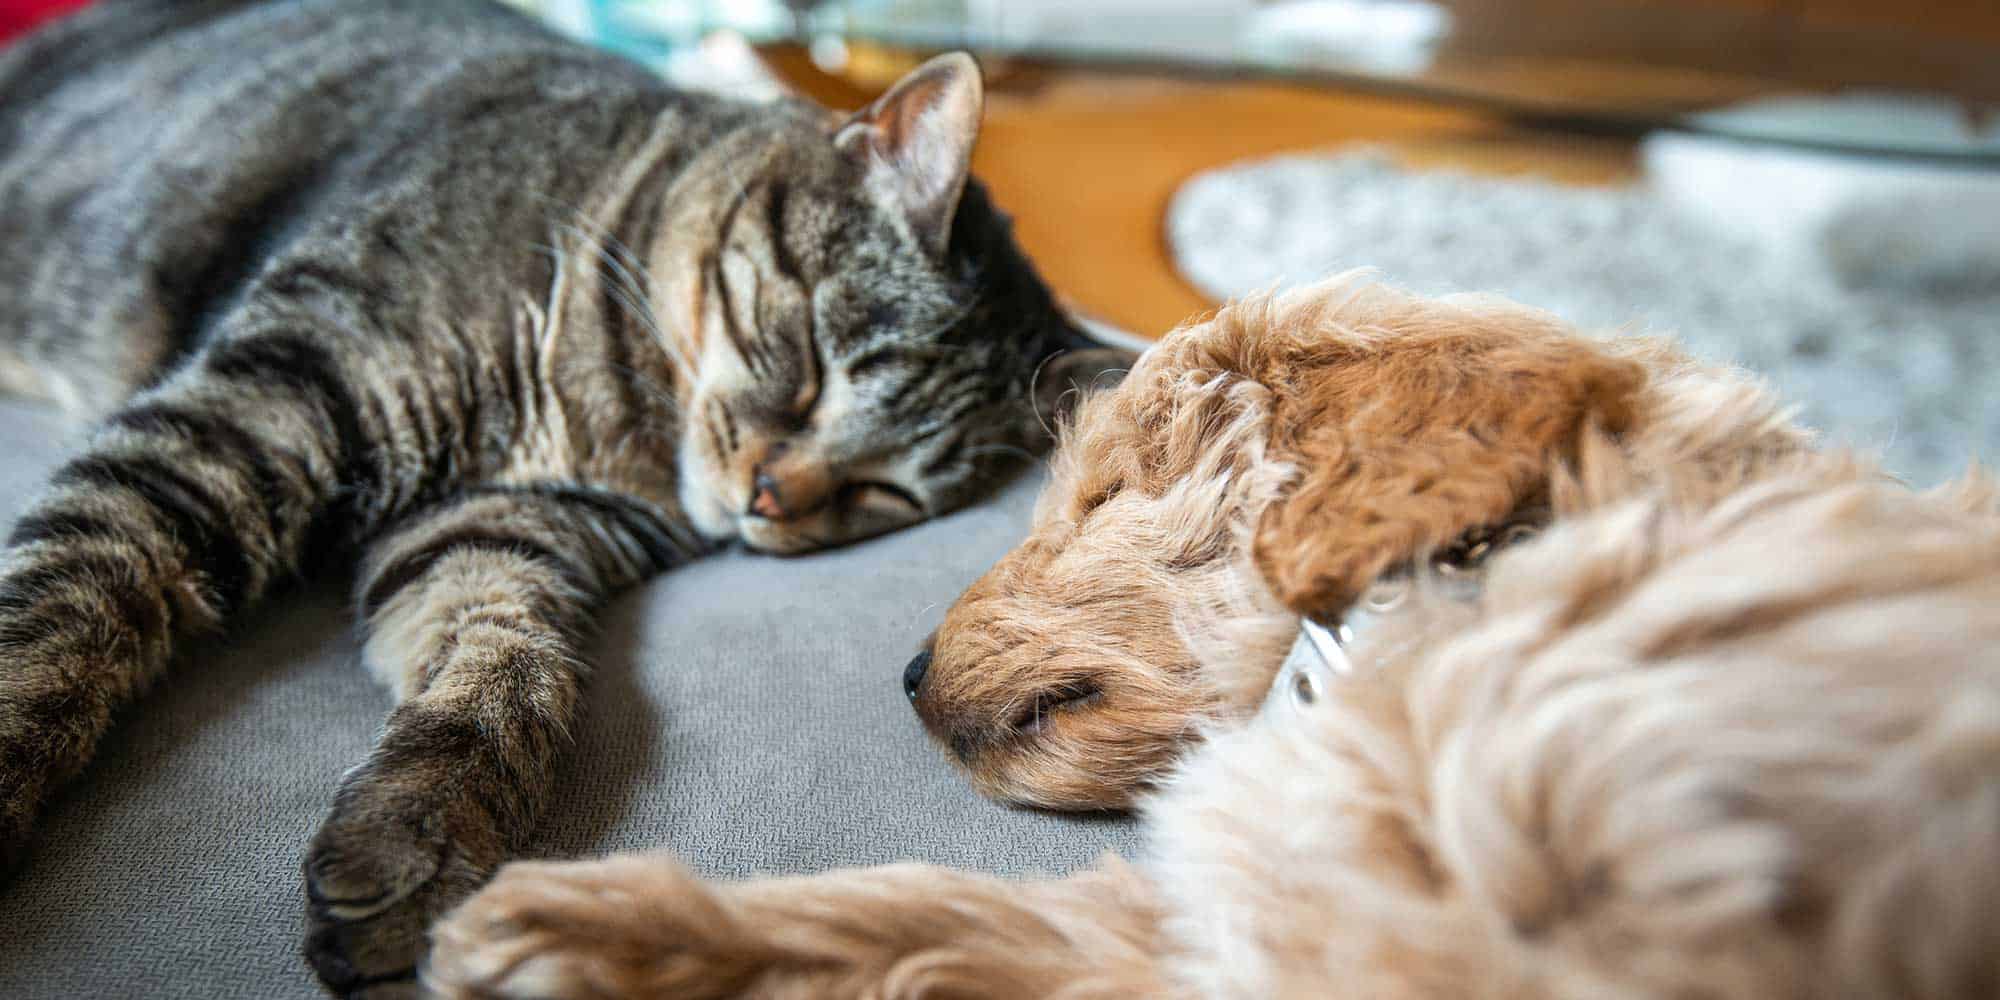 A dog and cat sleeping peacefully